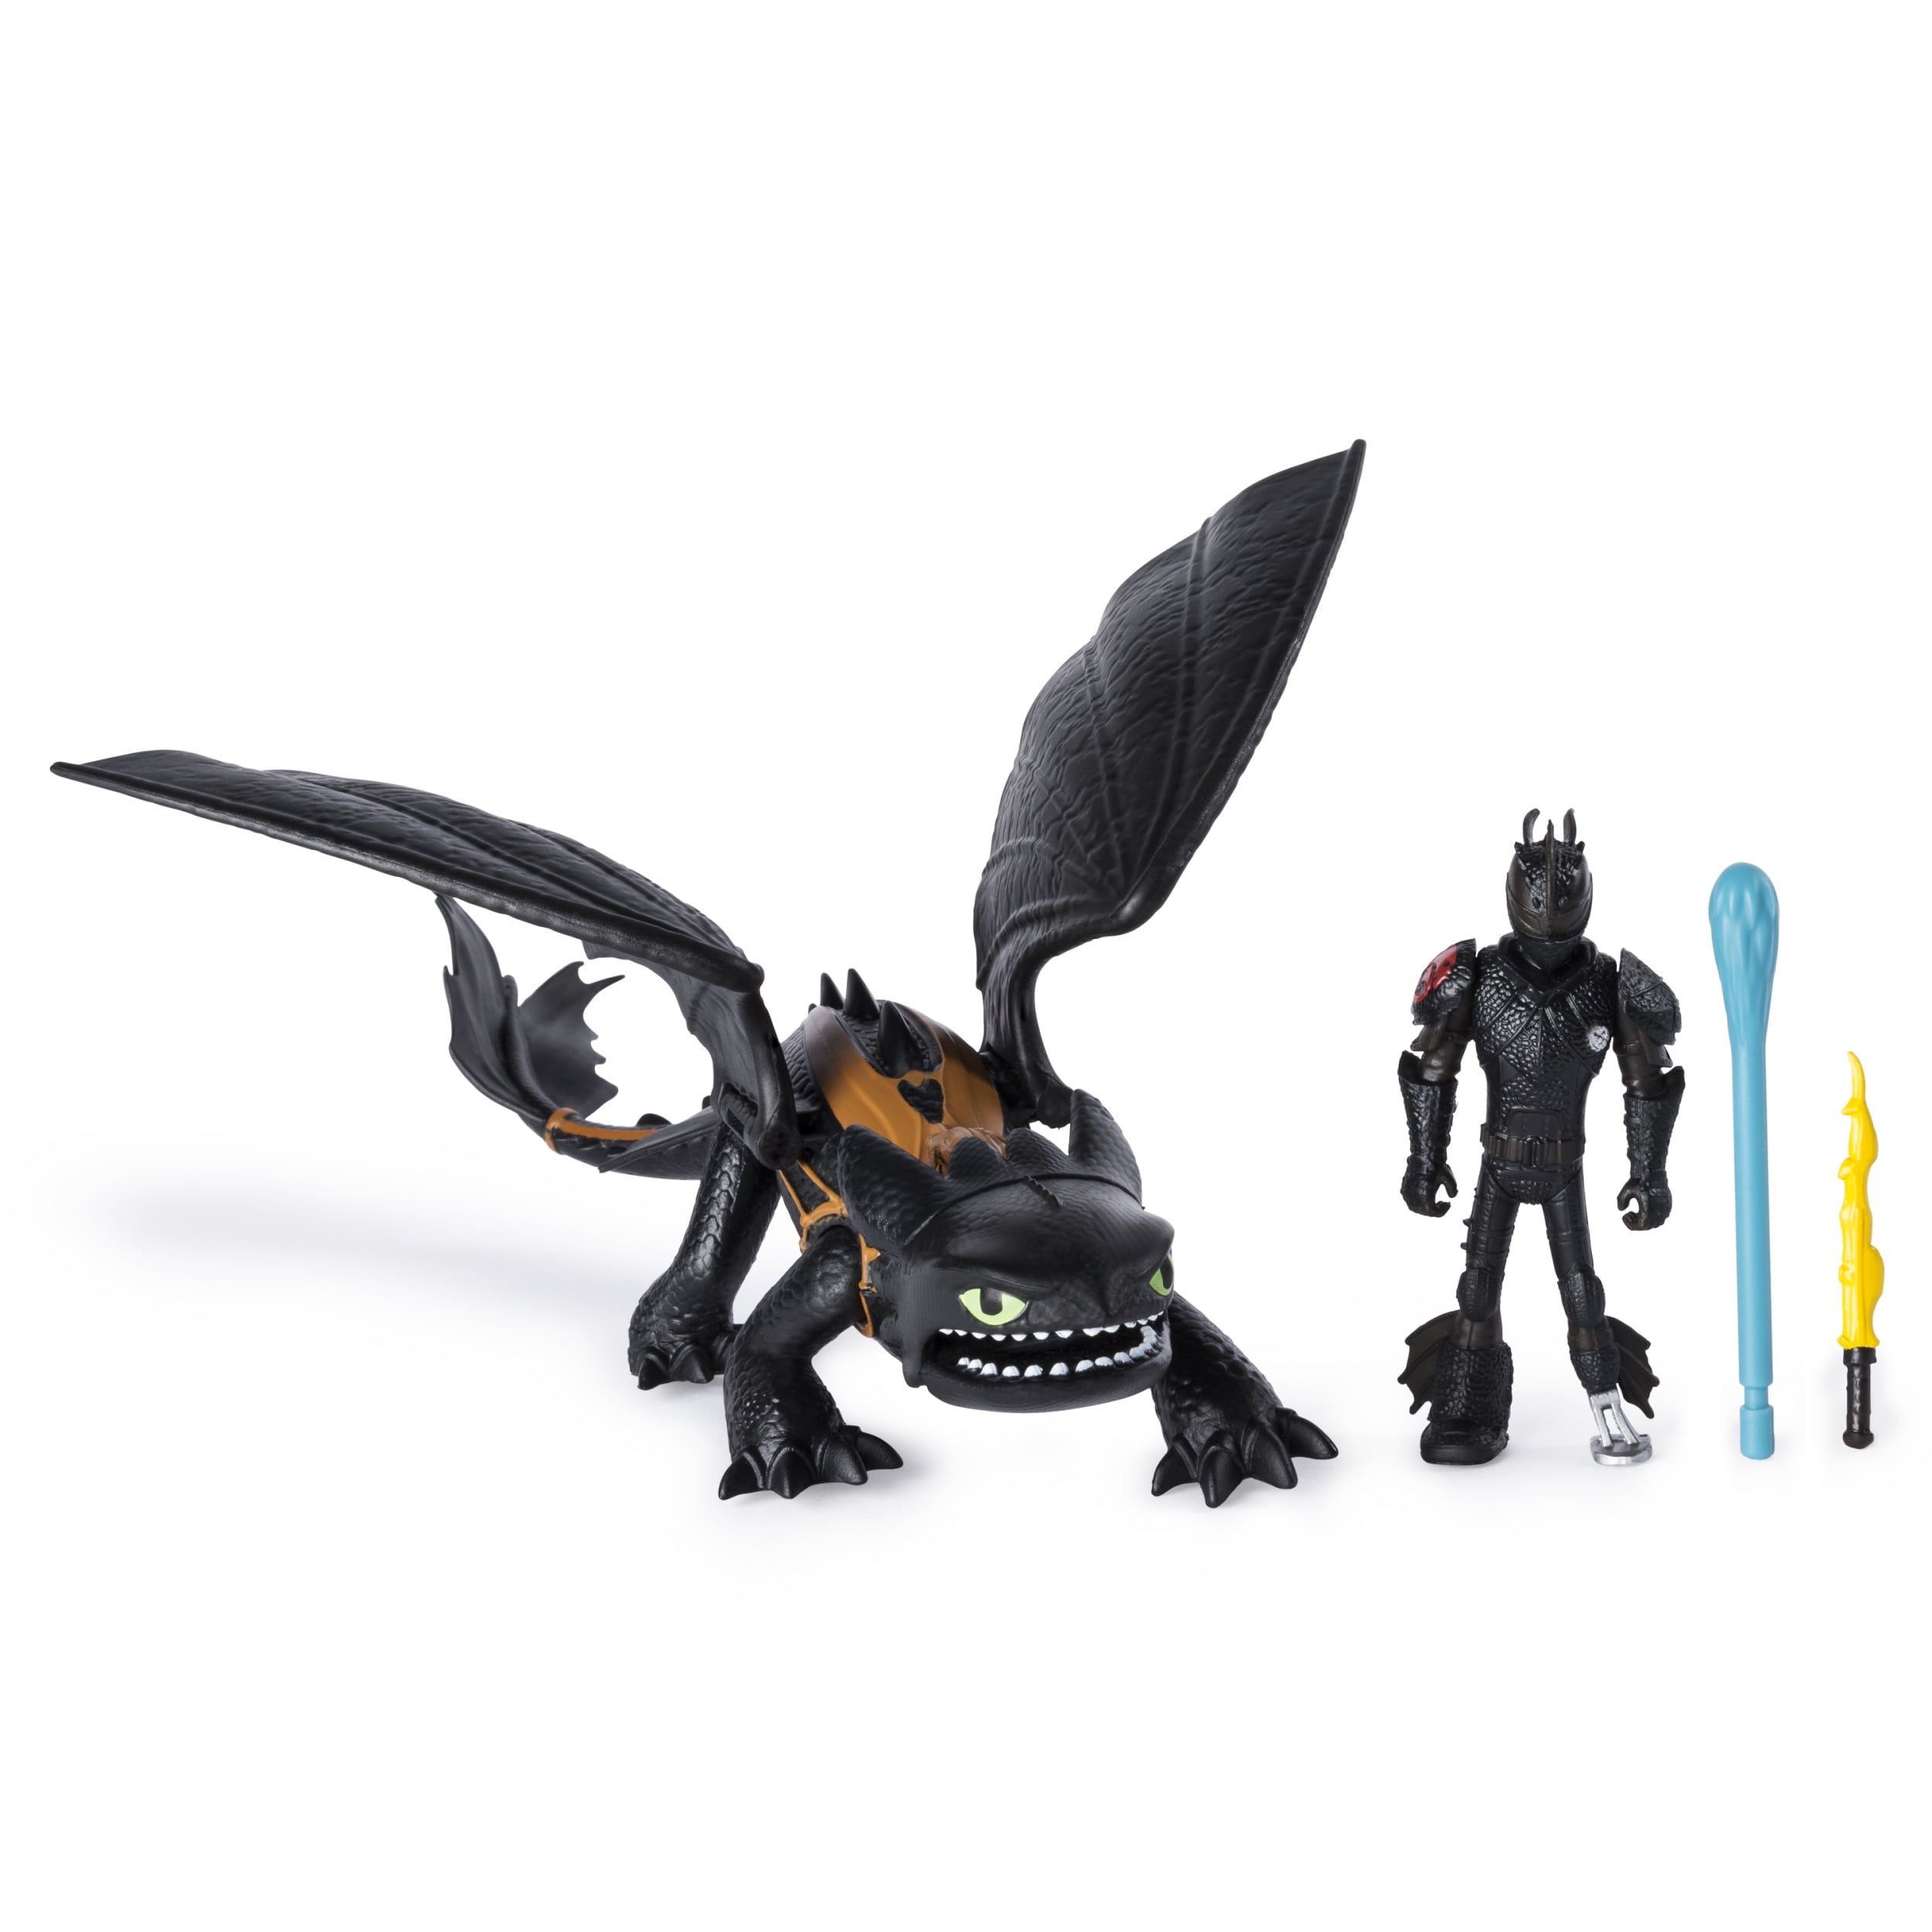 DreamWorks How to Train Your Dragon Toothless and Hiccup Armored Viking Figure 